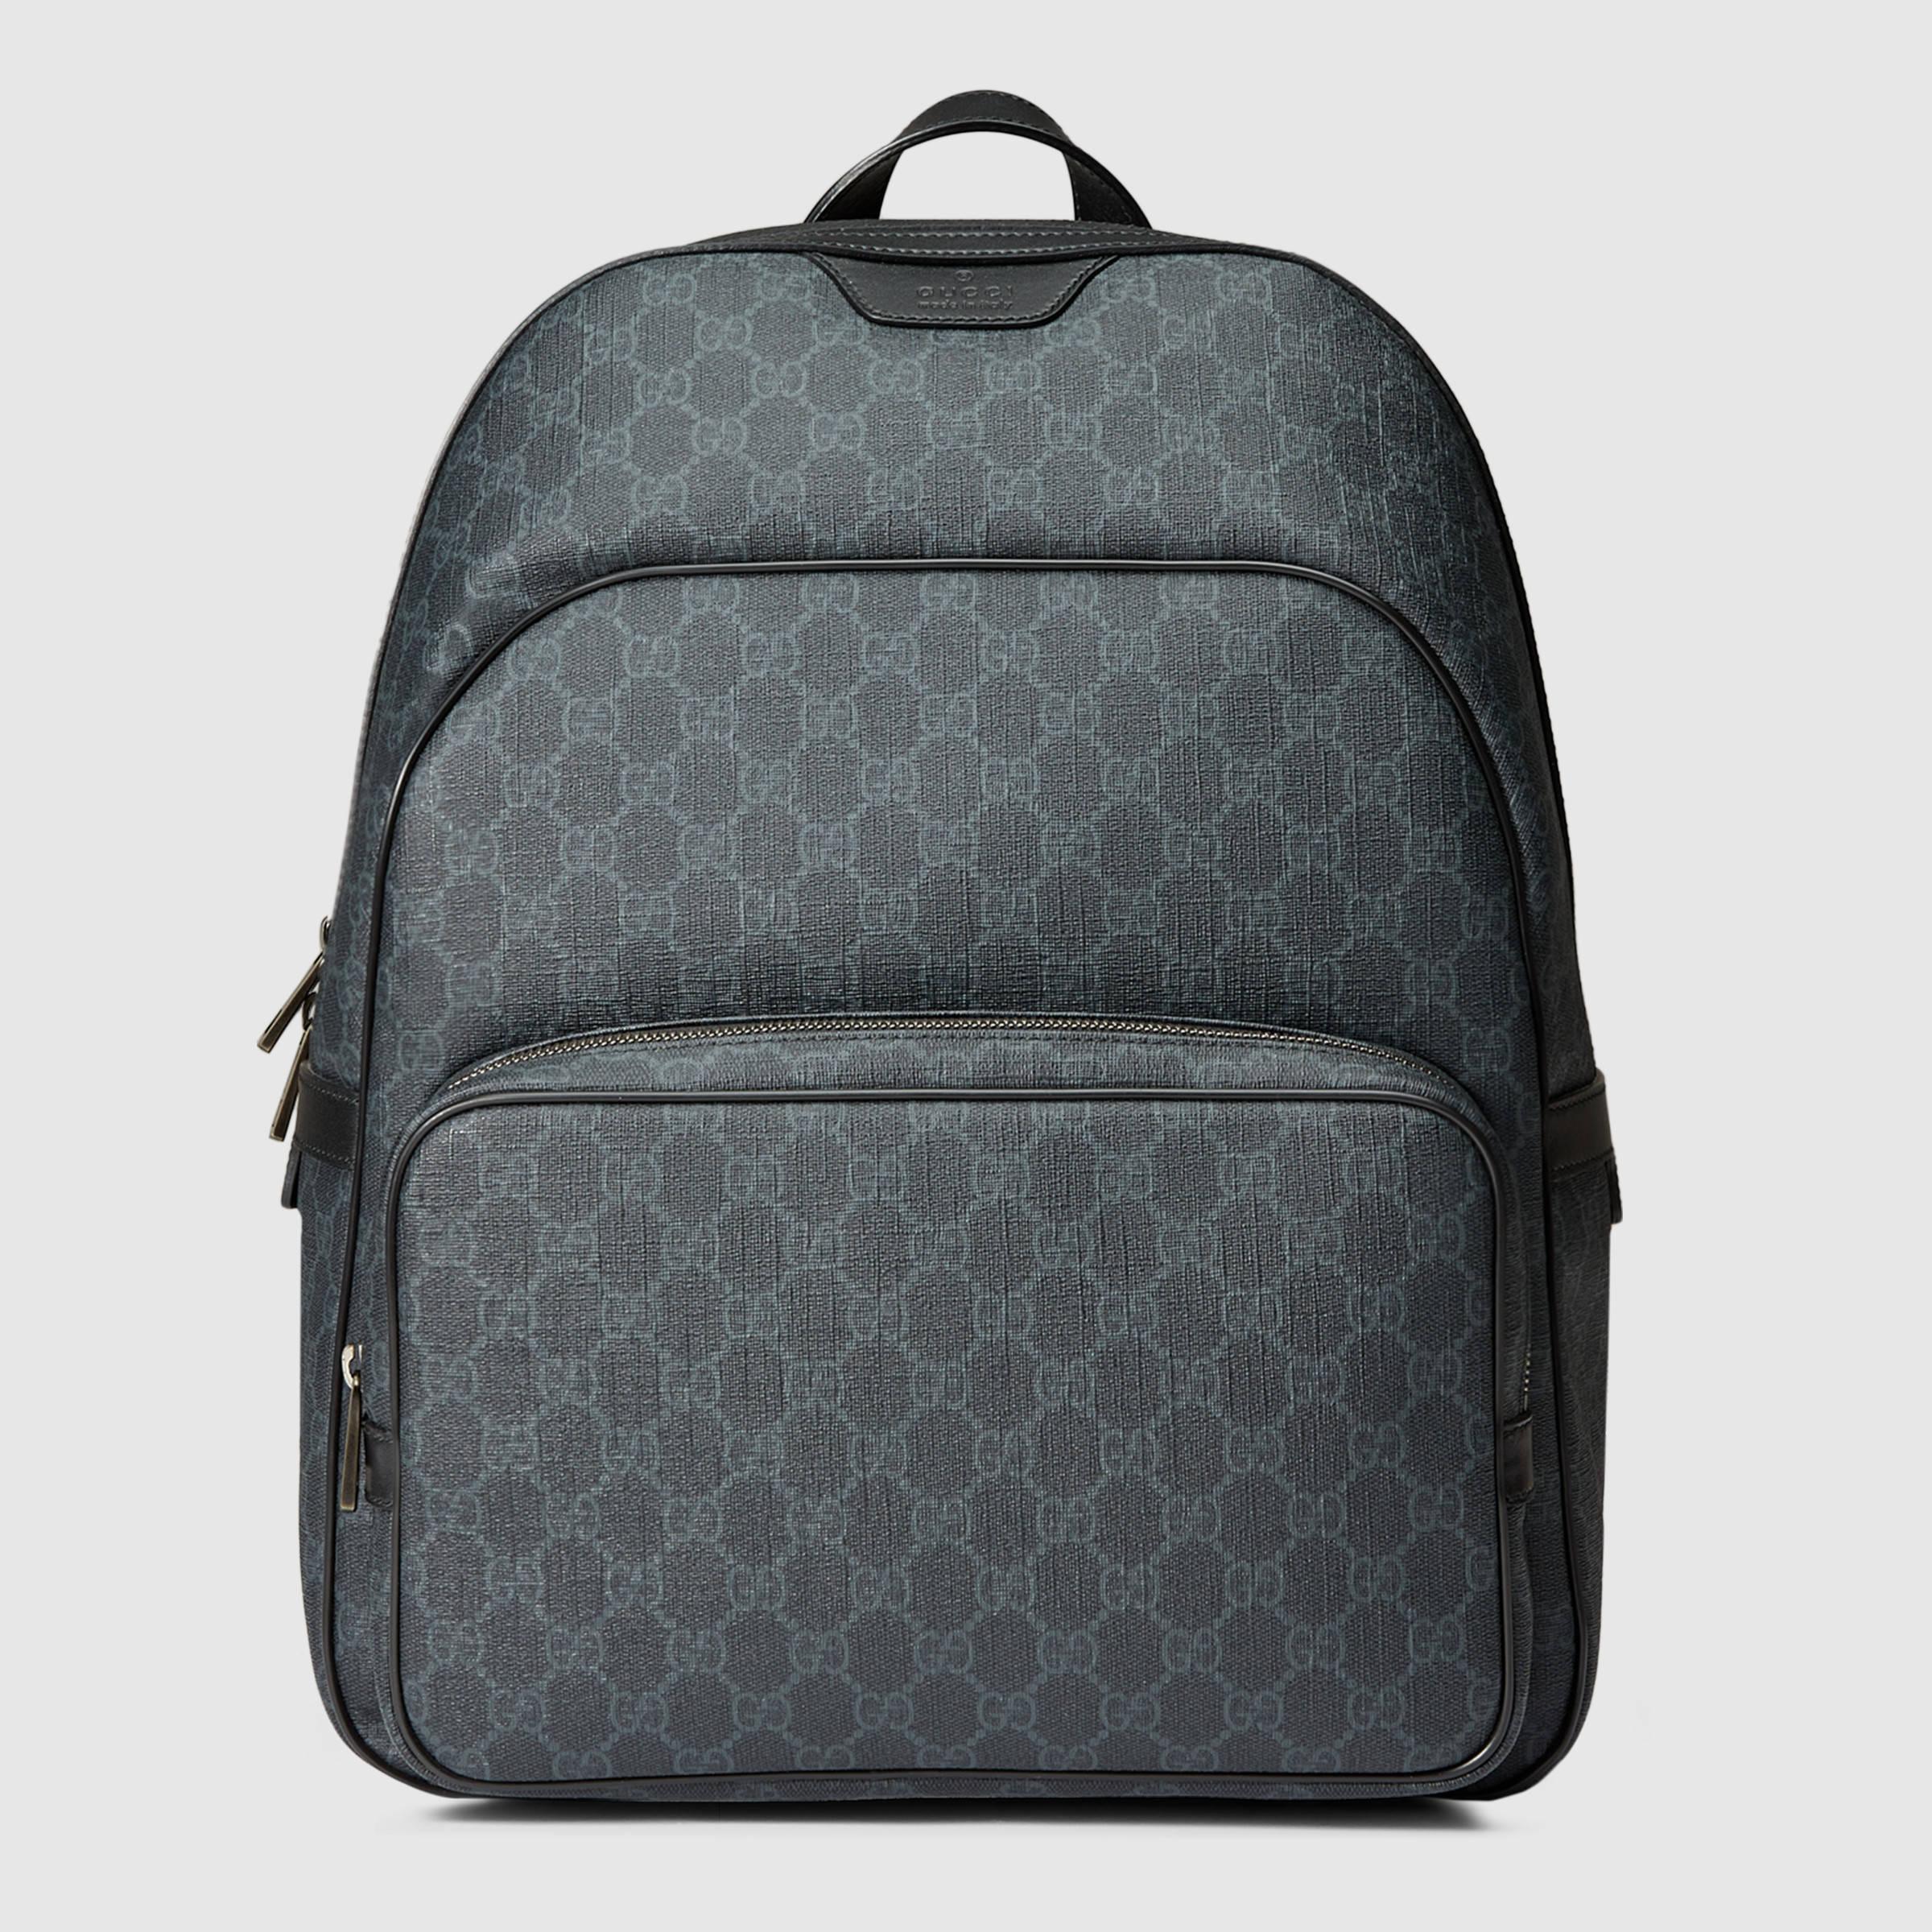 Gucci Gg Supreme Canvas Backpack in Gray for Men - Lyst